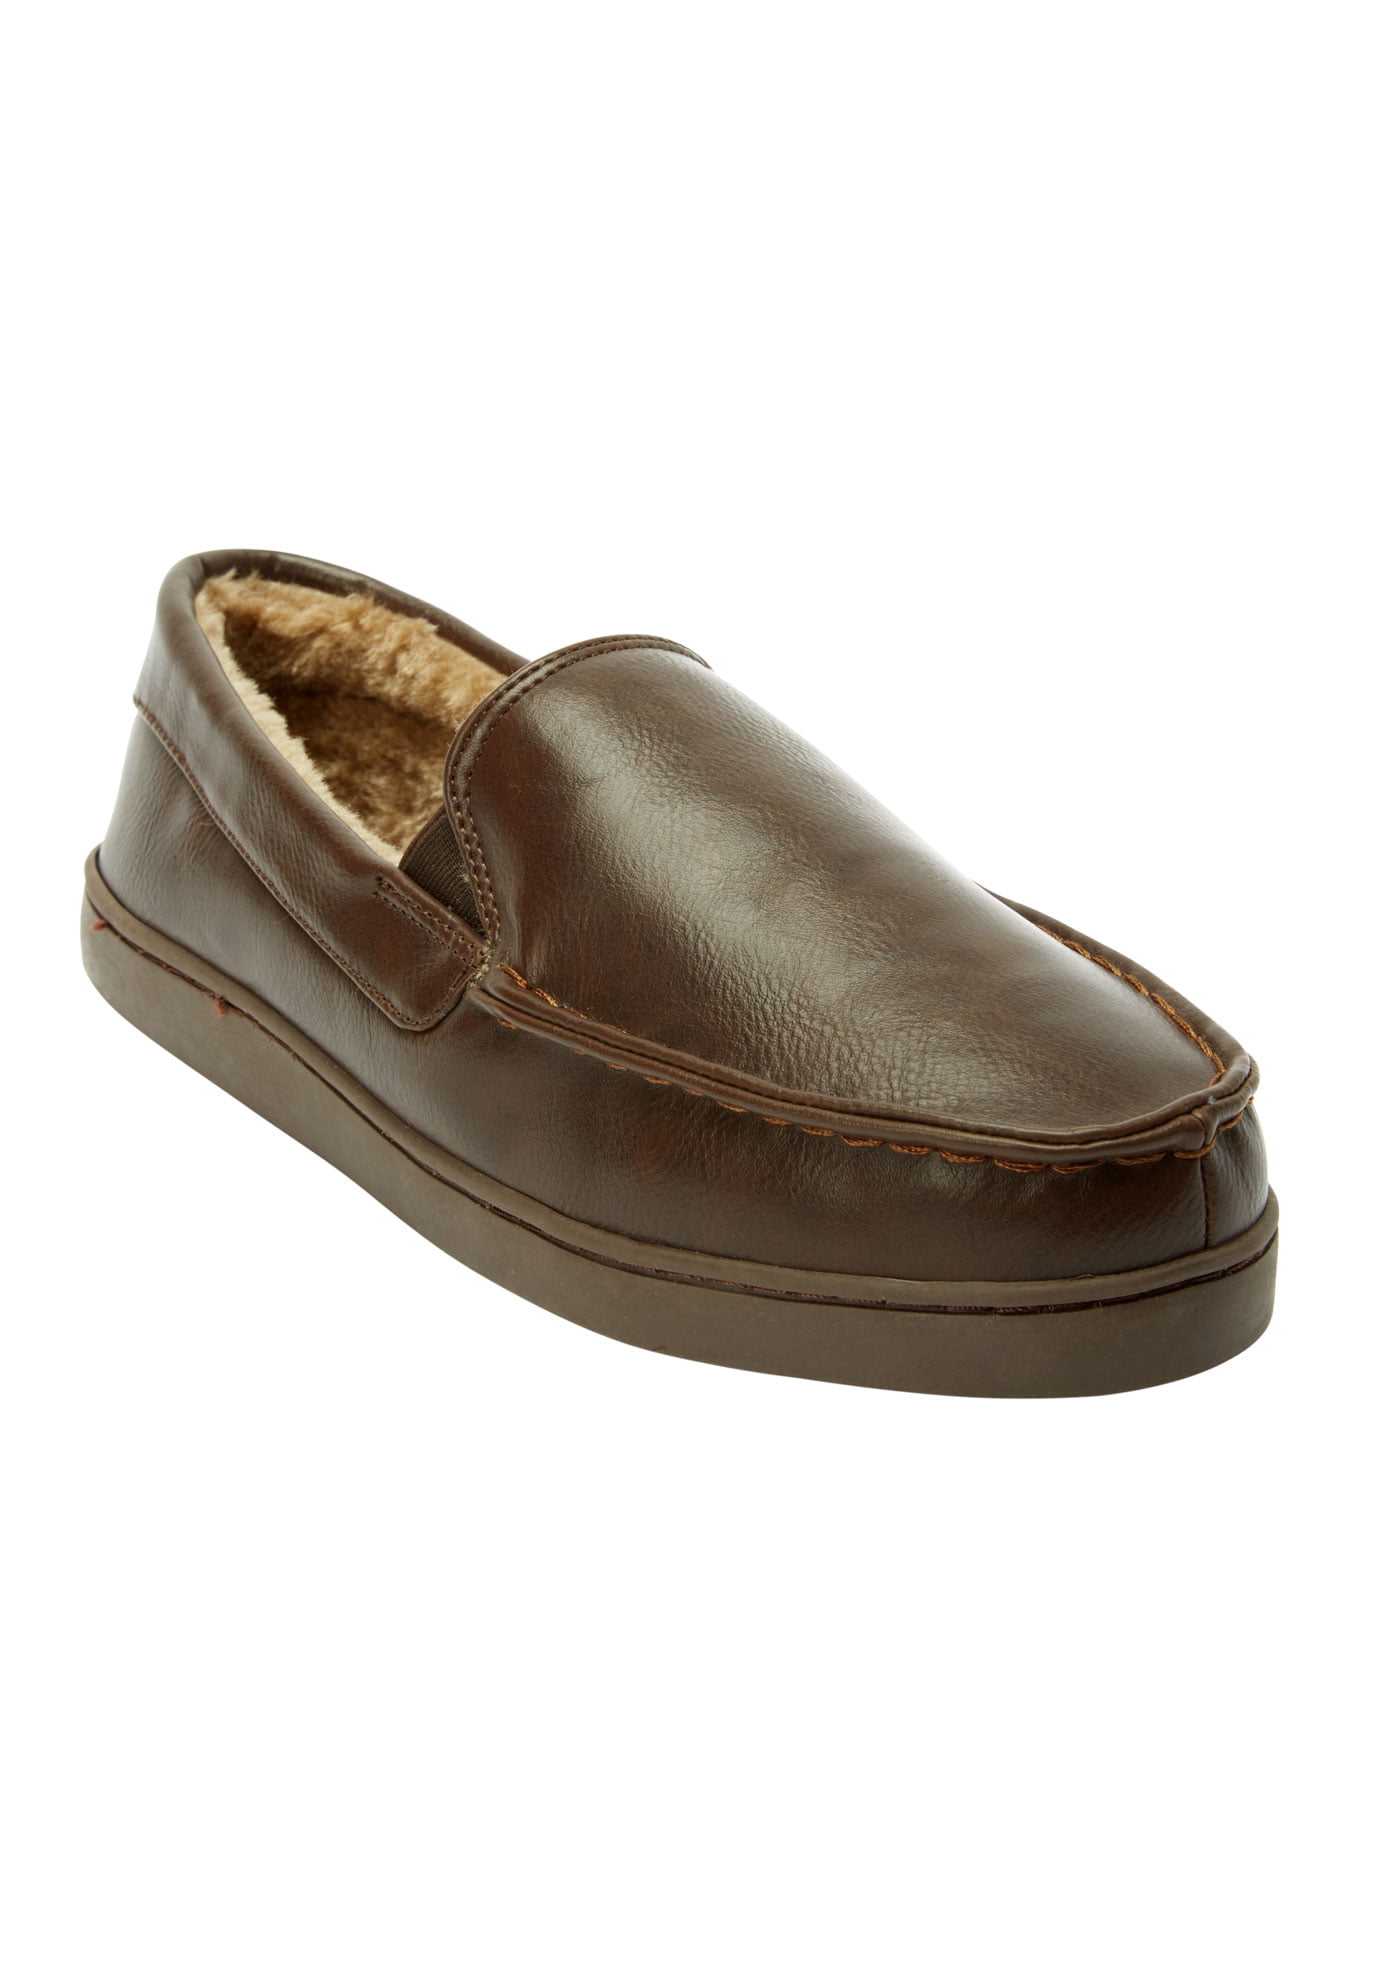 Mens Leather Slippers with Memory Foam Insole M006 